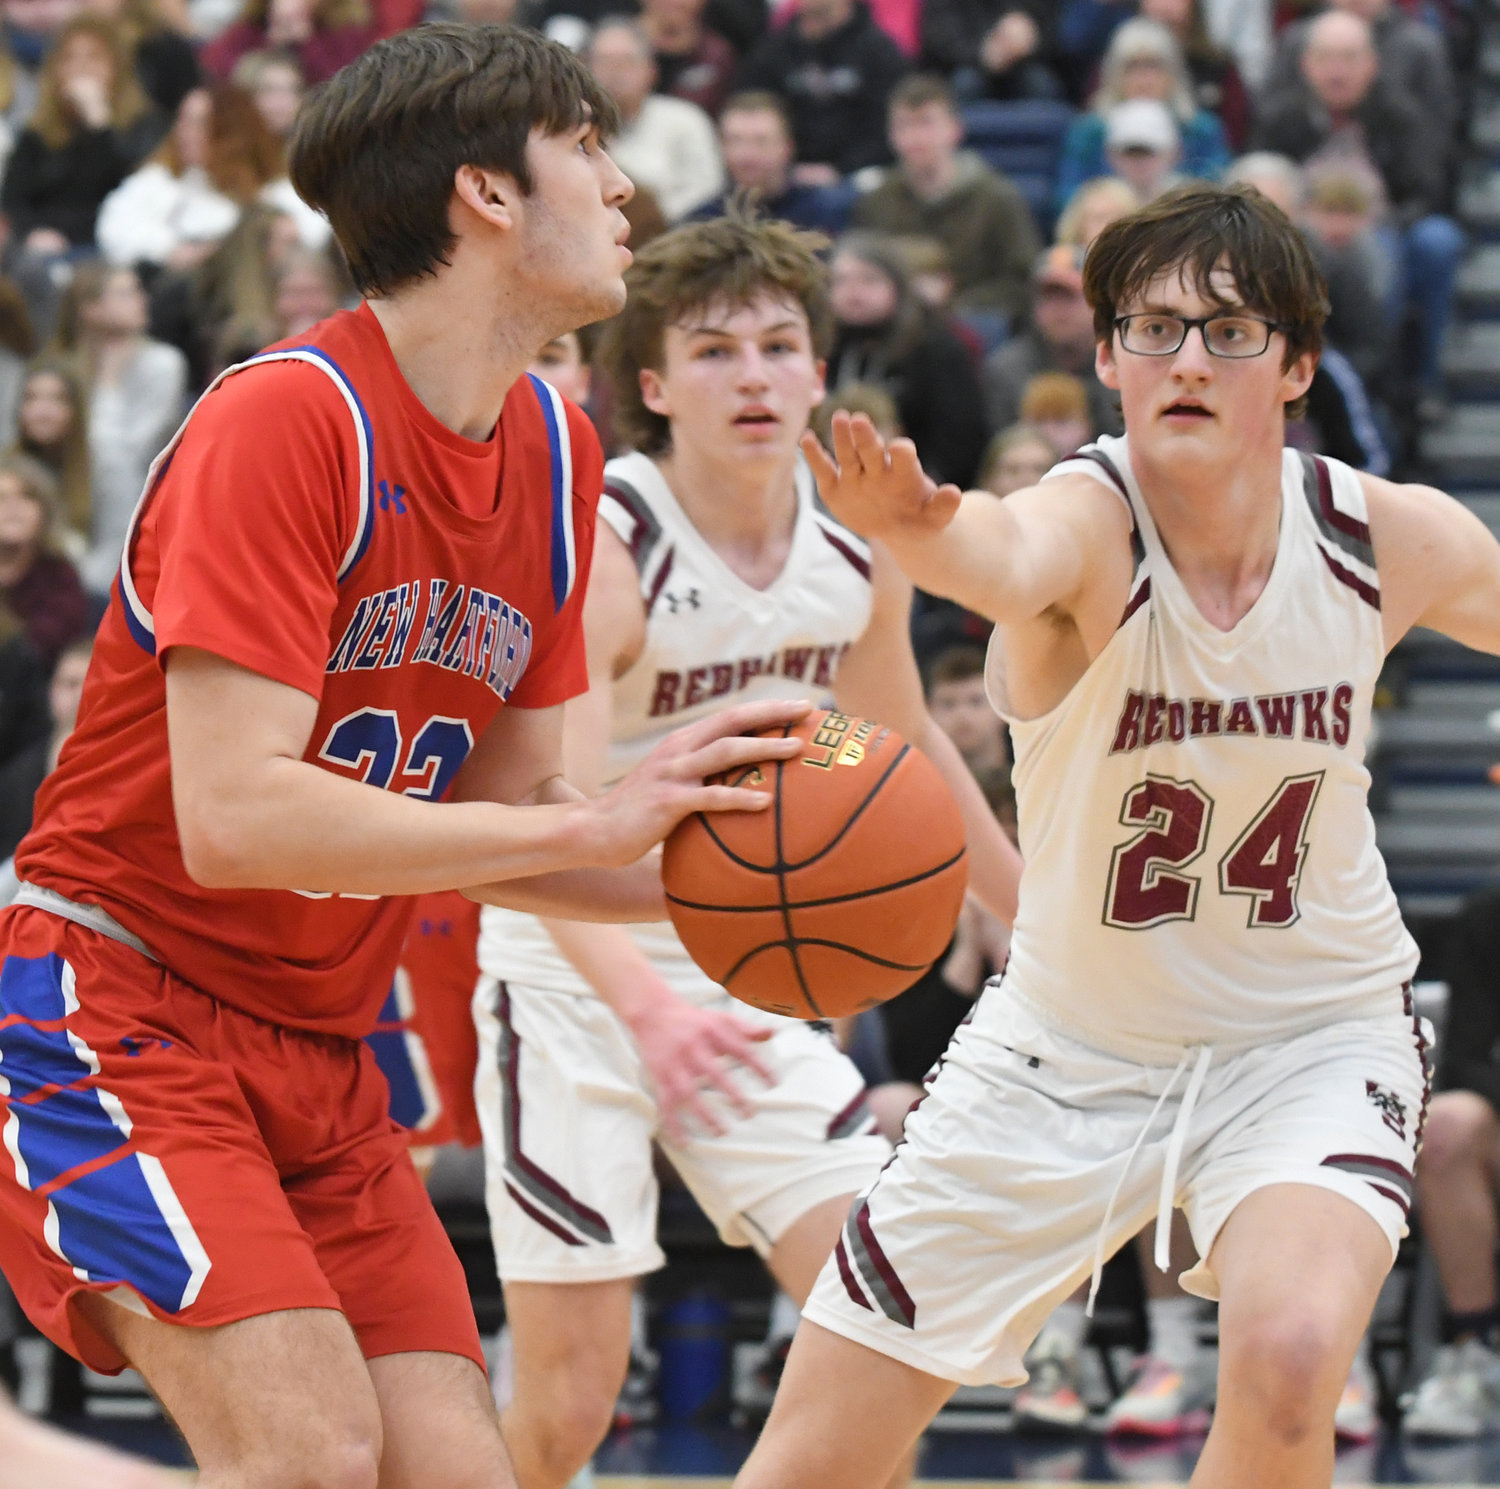 New Hartford's Colton Suriano squares up for a shot with Central Square's Cameron Pownall defending in the first half Sunday night at SRC Arena. New Hartford won 65-60 to earn the Section III Class A title.